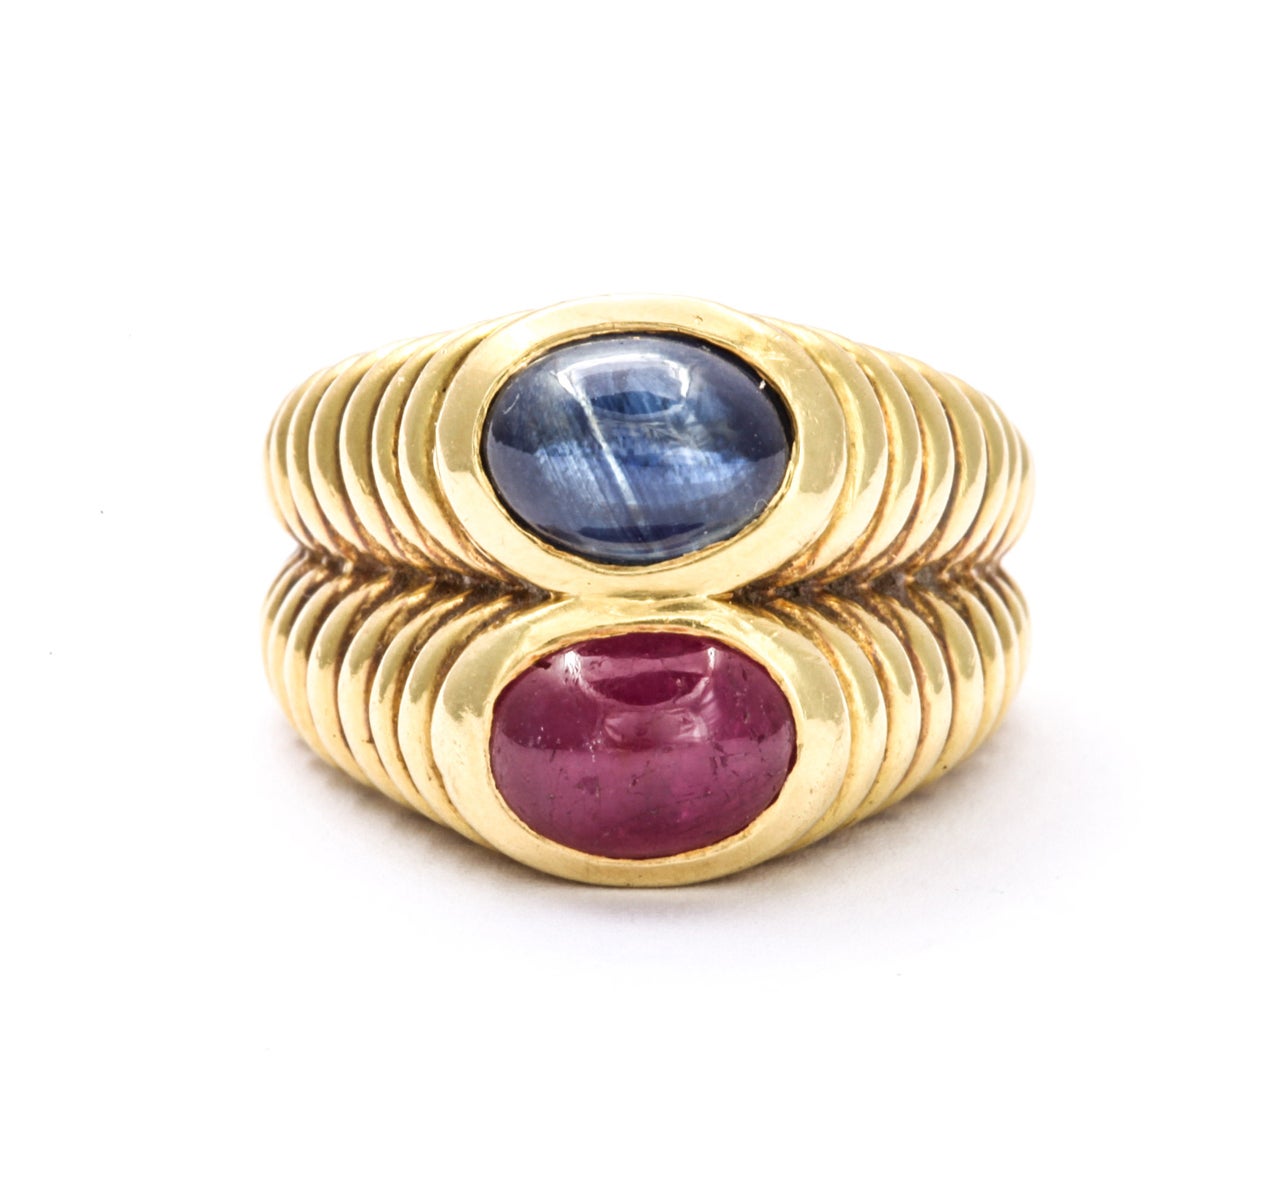 A fashionable double band ring of 18 kt gold  that elegantly sits raised from the finger. The gold band forms two pyramids that  are engraved in concentric rings. Atop in oval frames  sit  a sapphire and a ruby. The ring proportions are wearable and